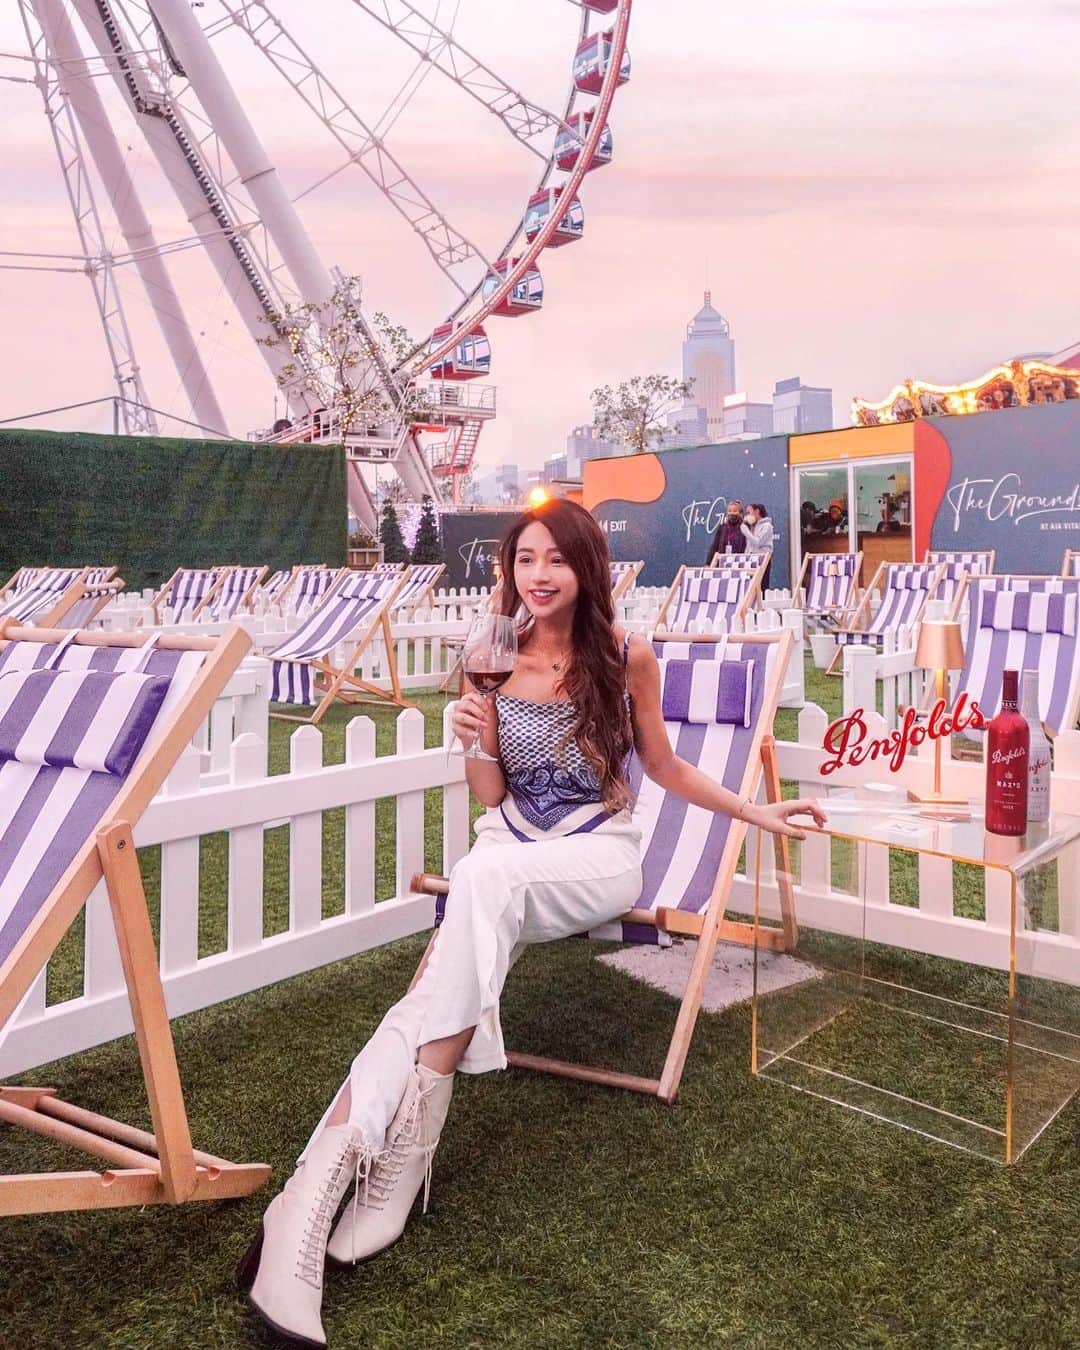 Moanna S.のインスタグラム：「Outdoor cinema in Hong Kong!   Finally here at the Grounds - an open-air theatre featuring private viewing pods 🎥Perfect for movie dates with a drink or two at the on-site bar provided by @penfolds Max’s - love their Shiraz and Chardonnay!🍷  #penfoldsHK #penfoldsmax #thegroundshk #penfolds」